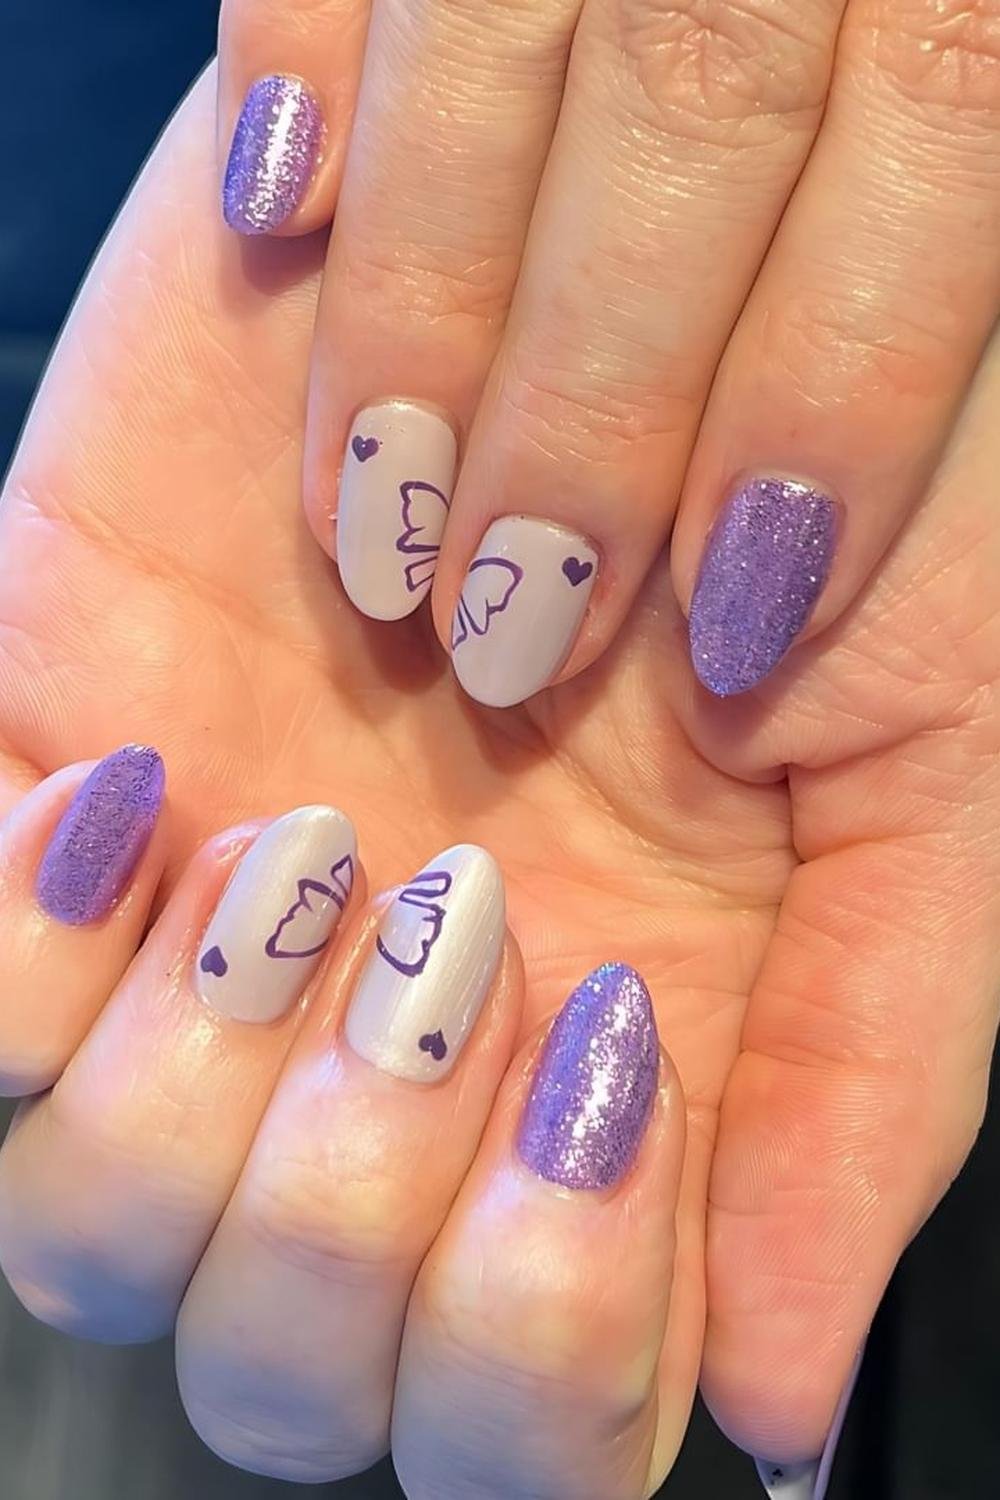 16 - Picture of Guts Tour Nails